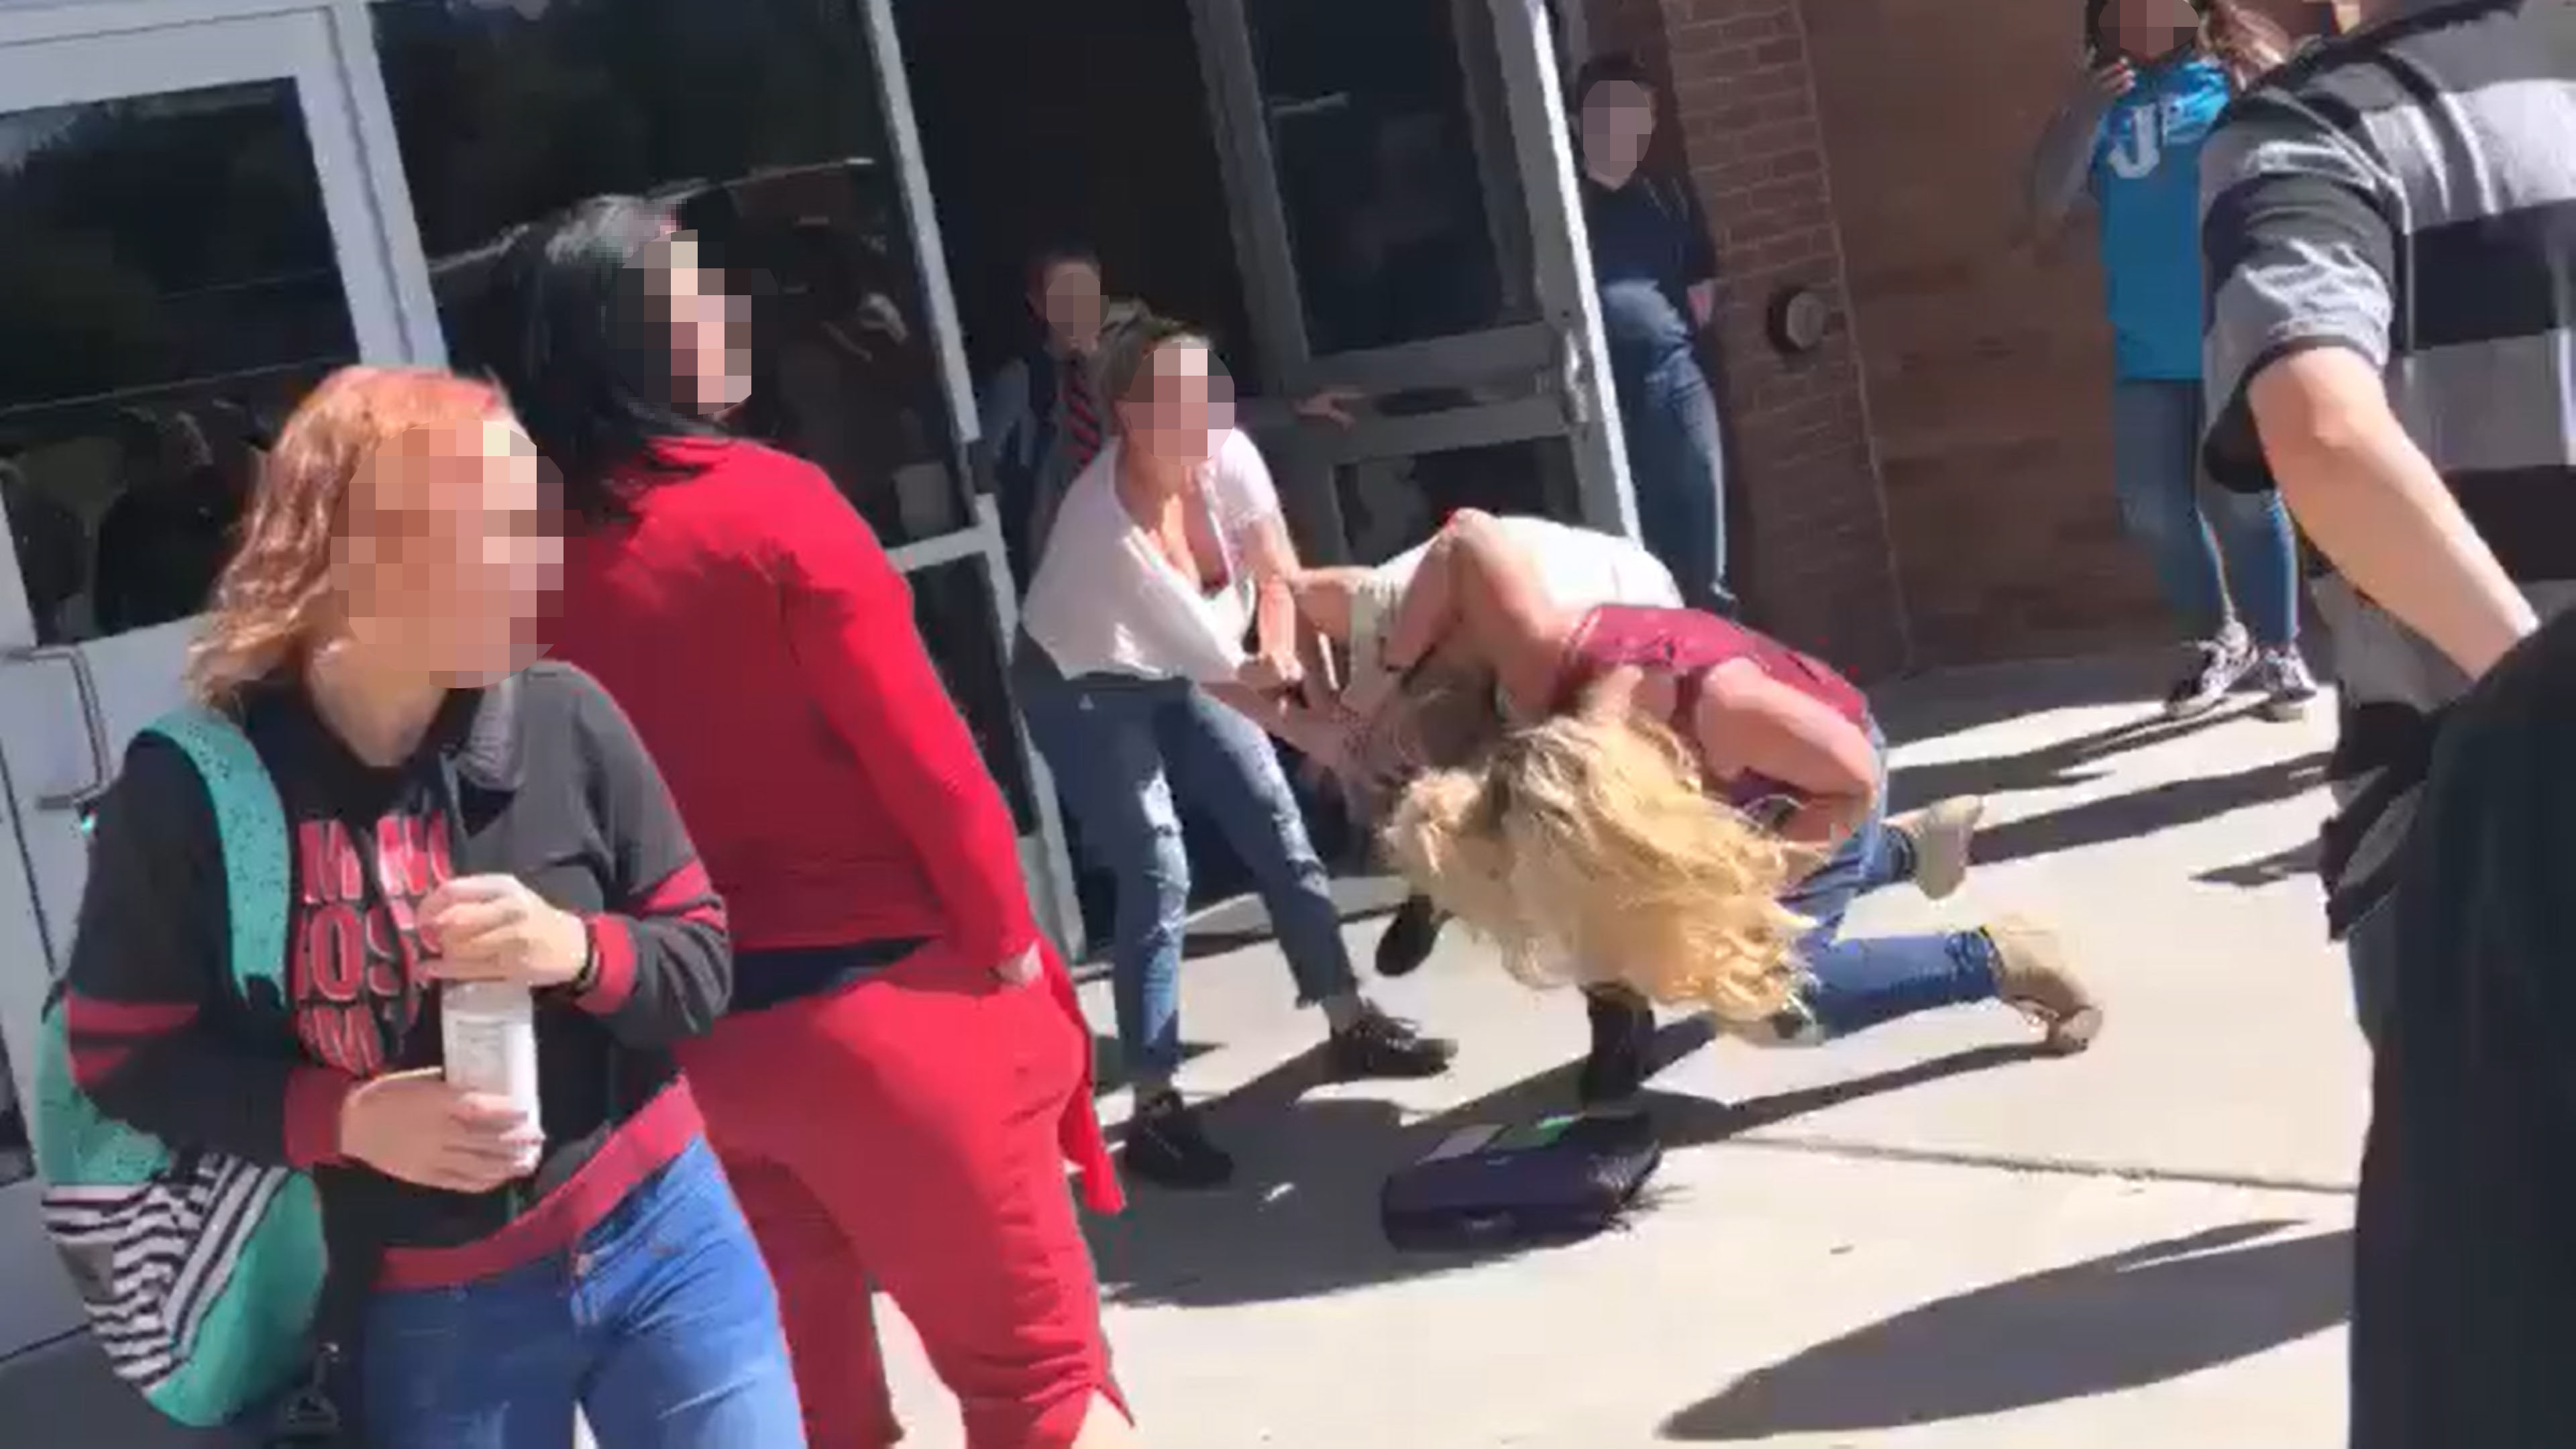 A woman in red, allegedly a teacher at the school, looks on during the assault. (Photo taken from video provided by Tonya Hiner)